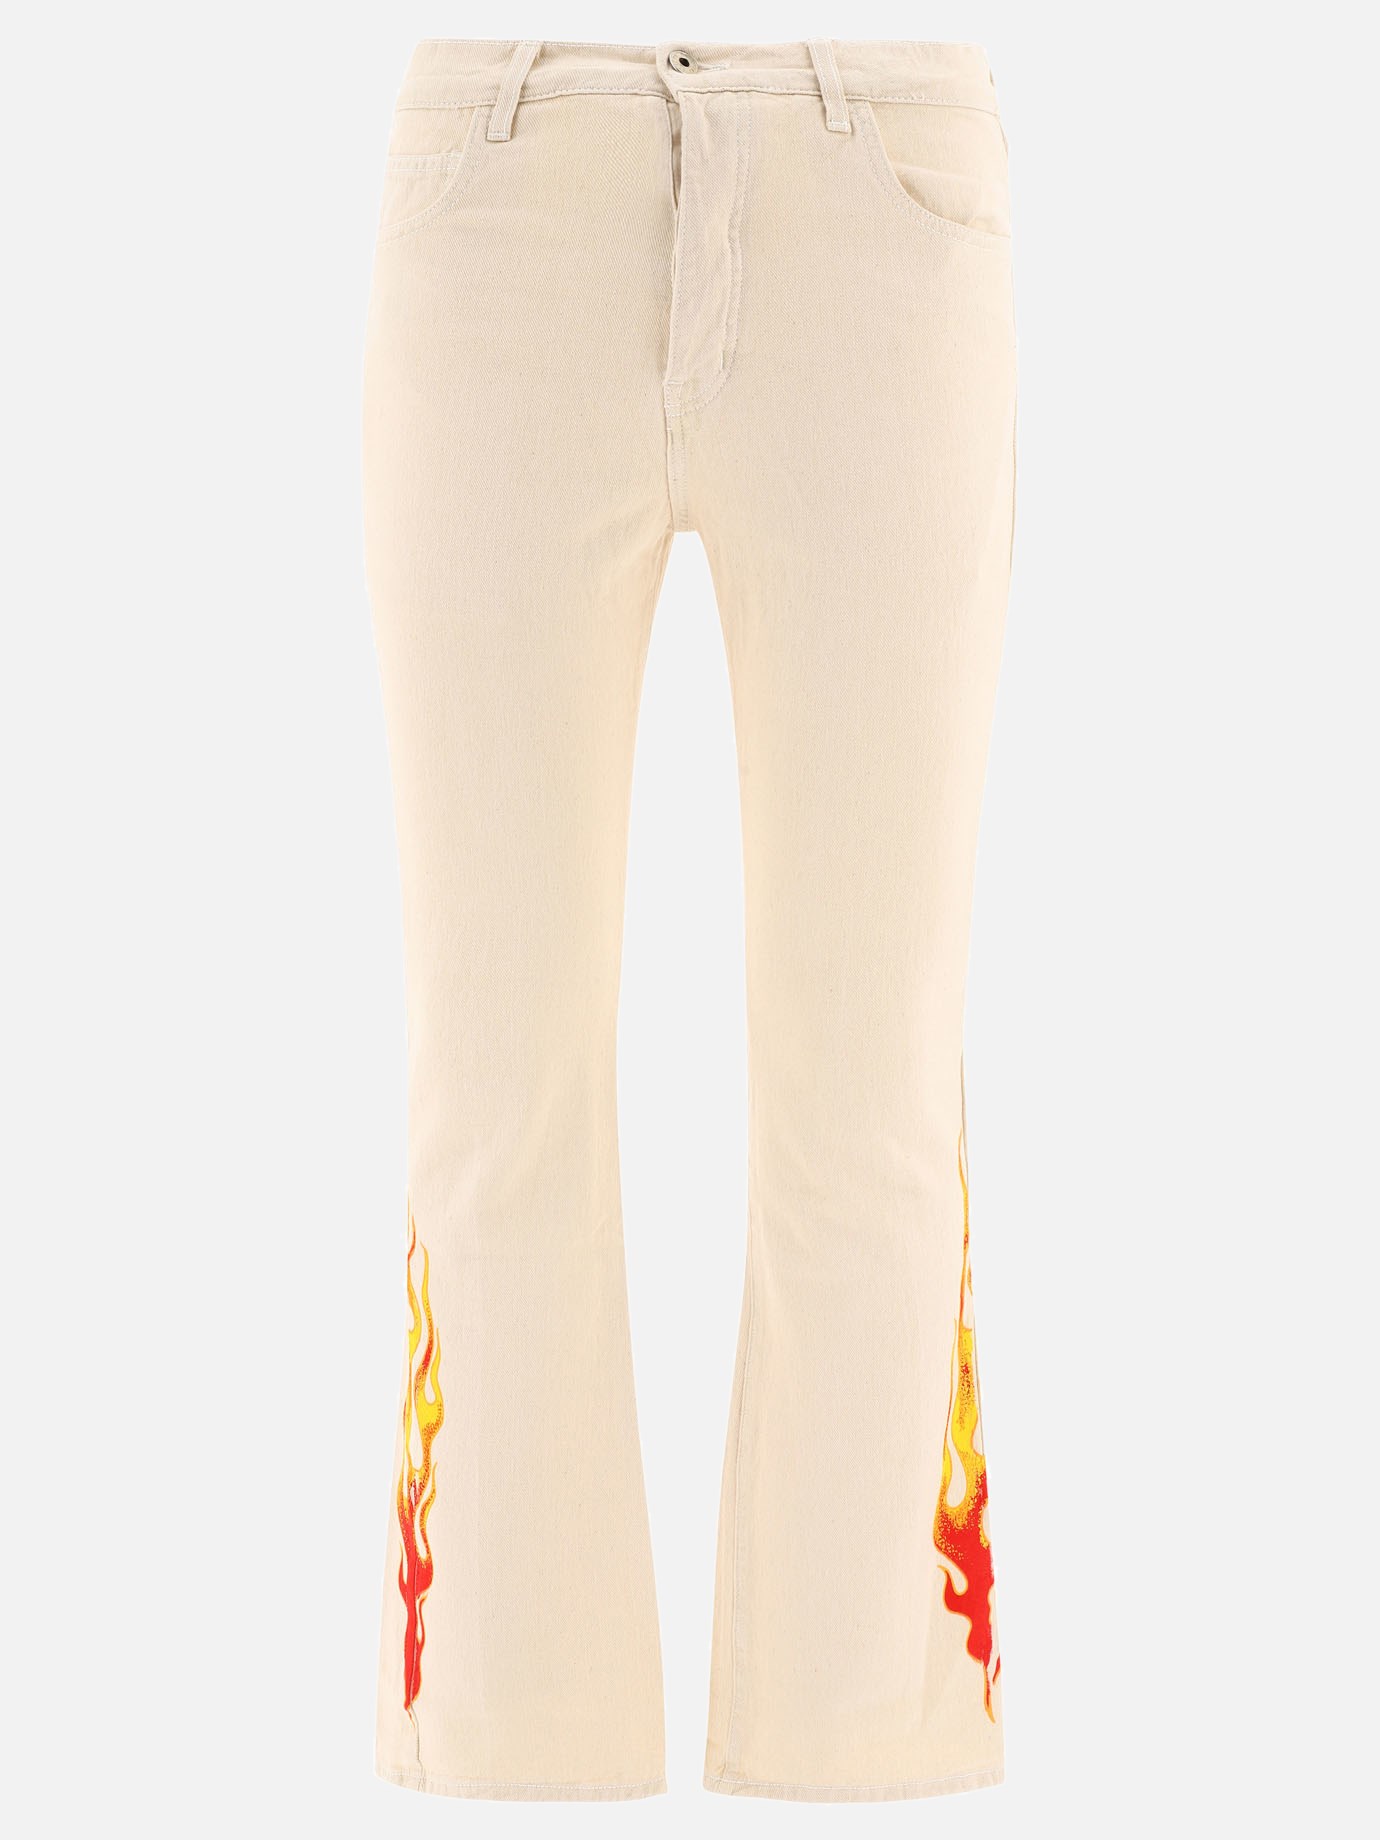 Jeans  Logan Flames by Gallery Dept. - 4